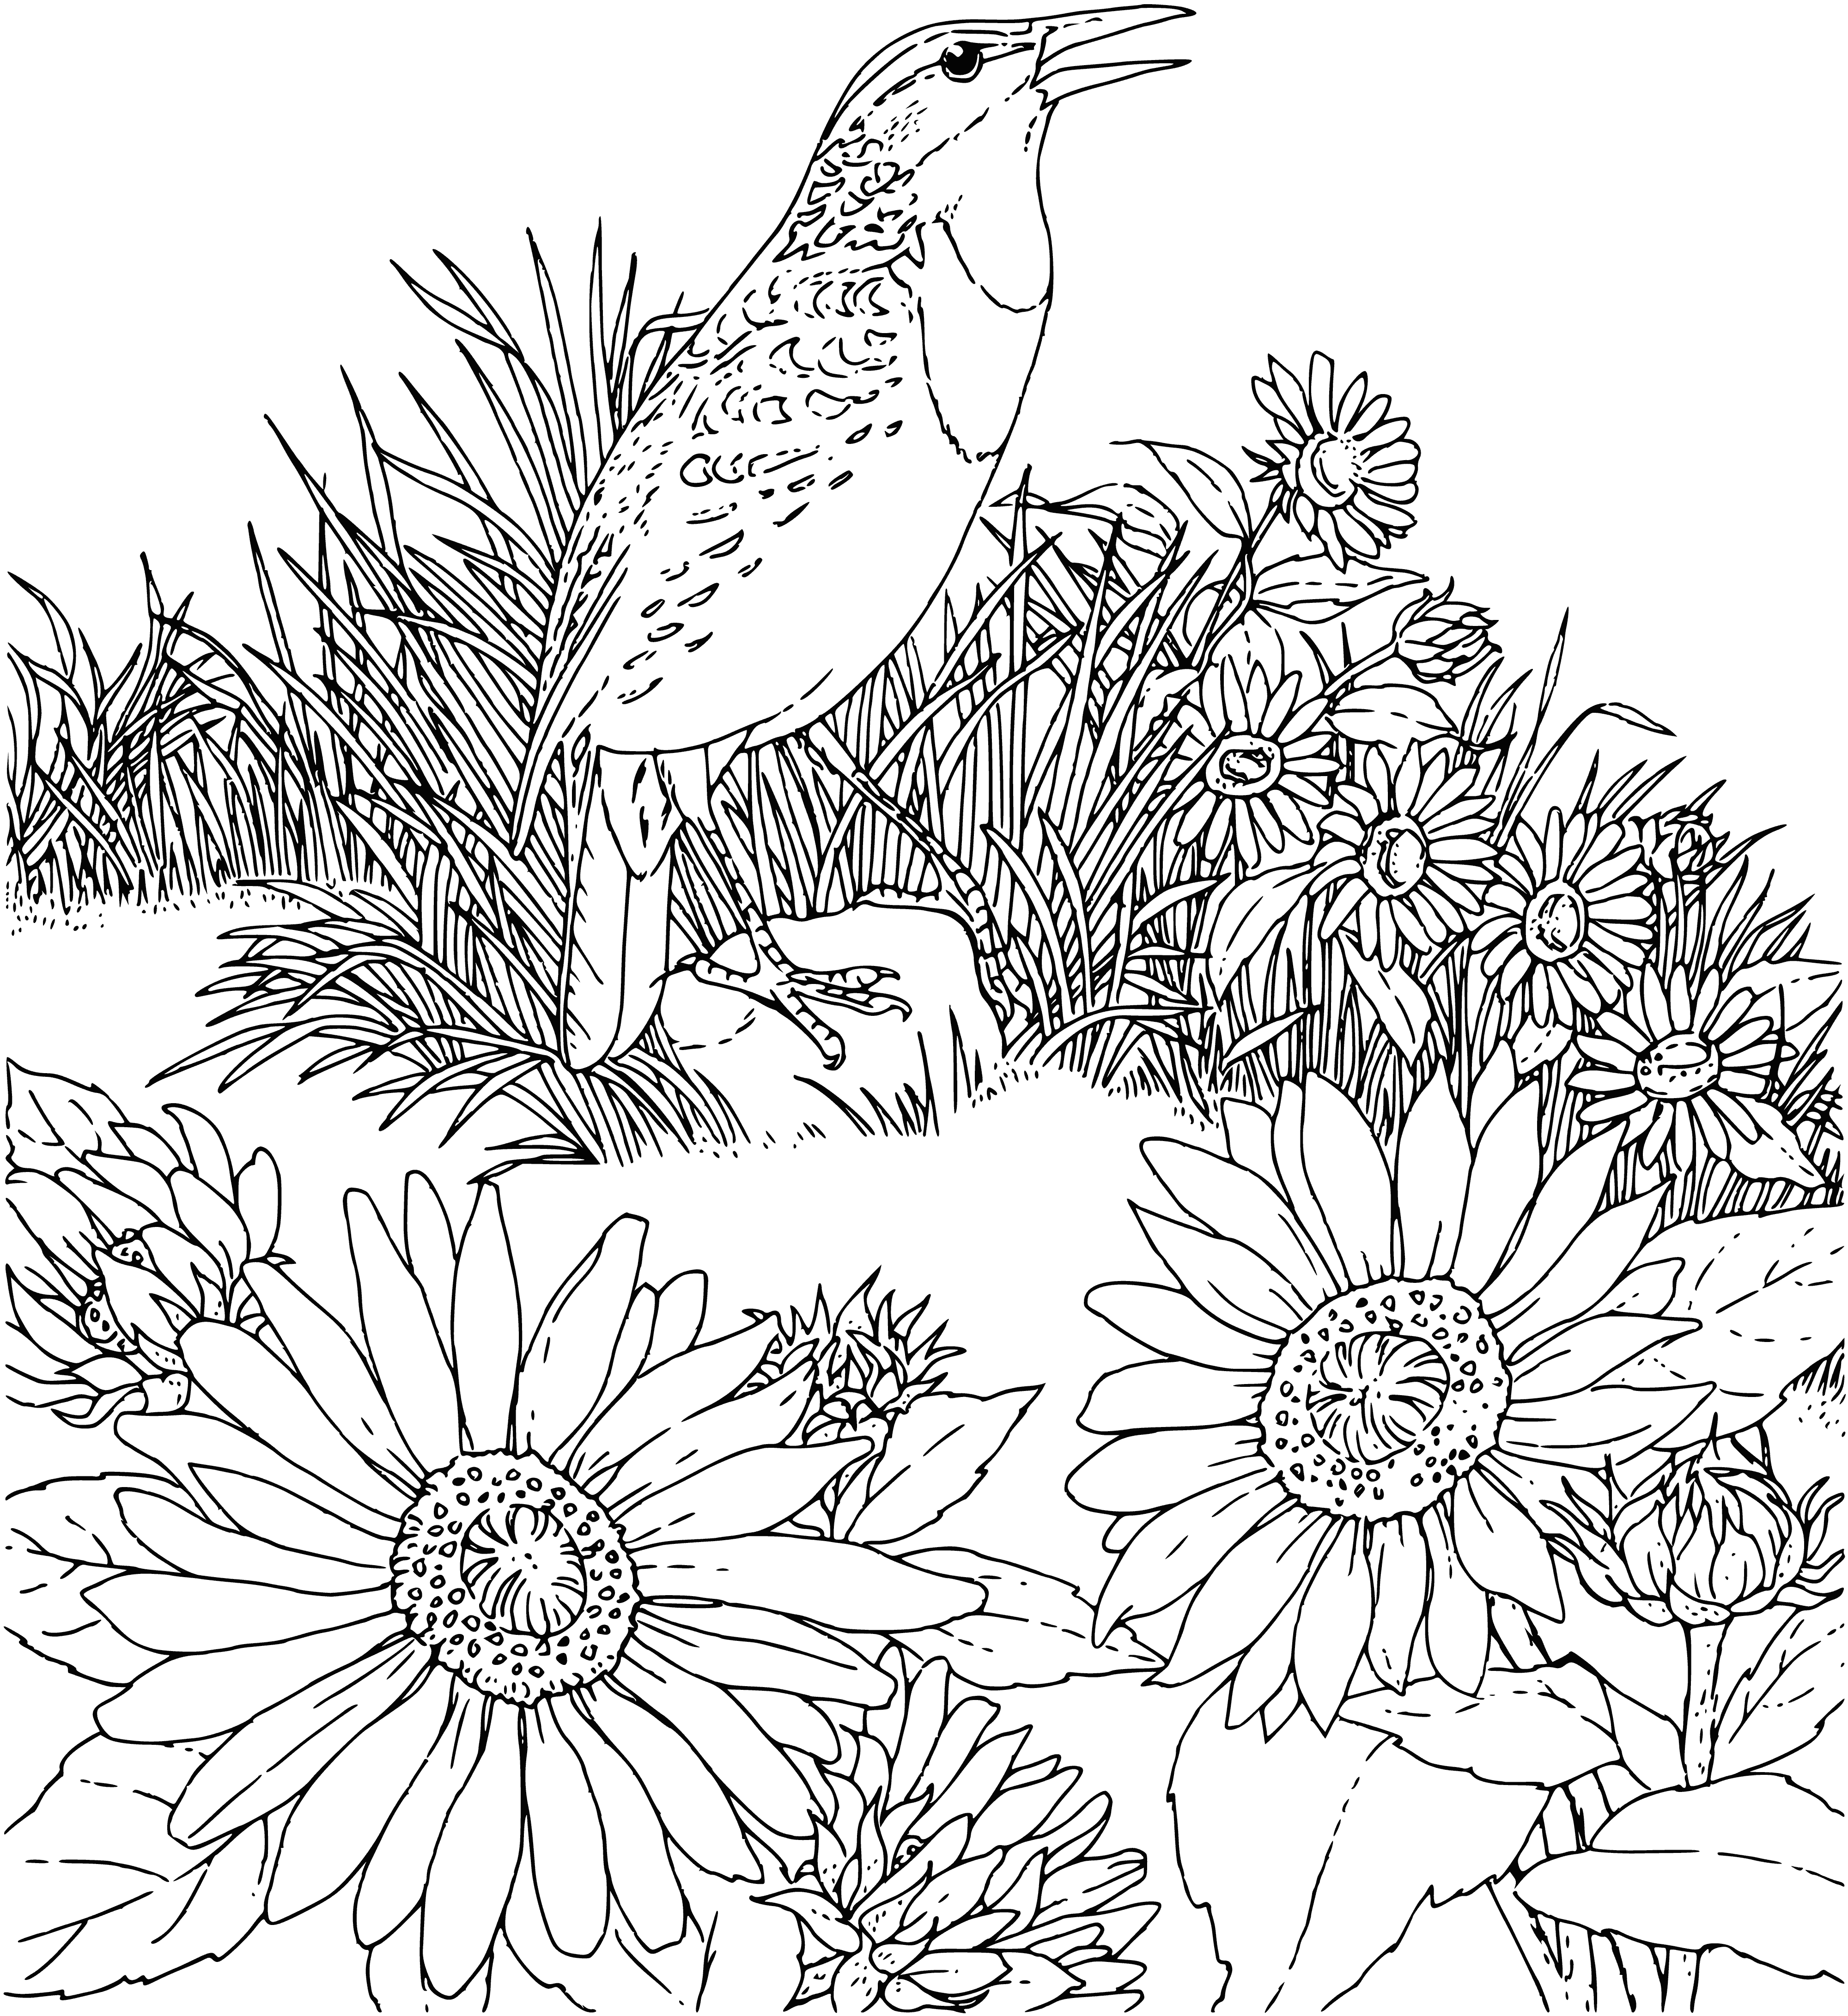 Lark coloring page